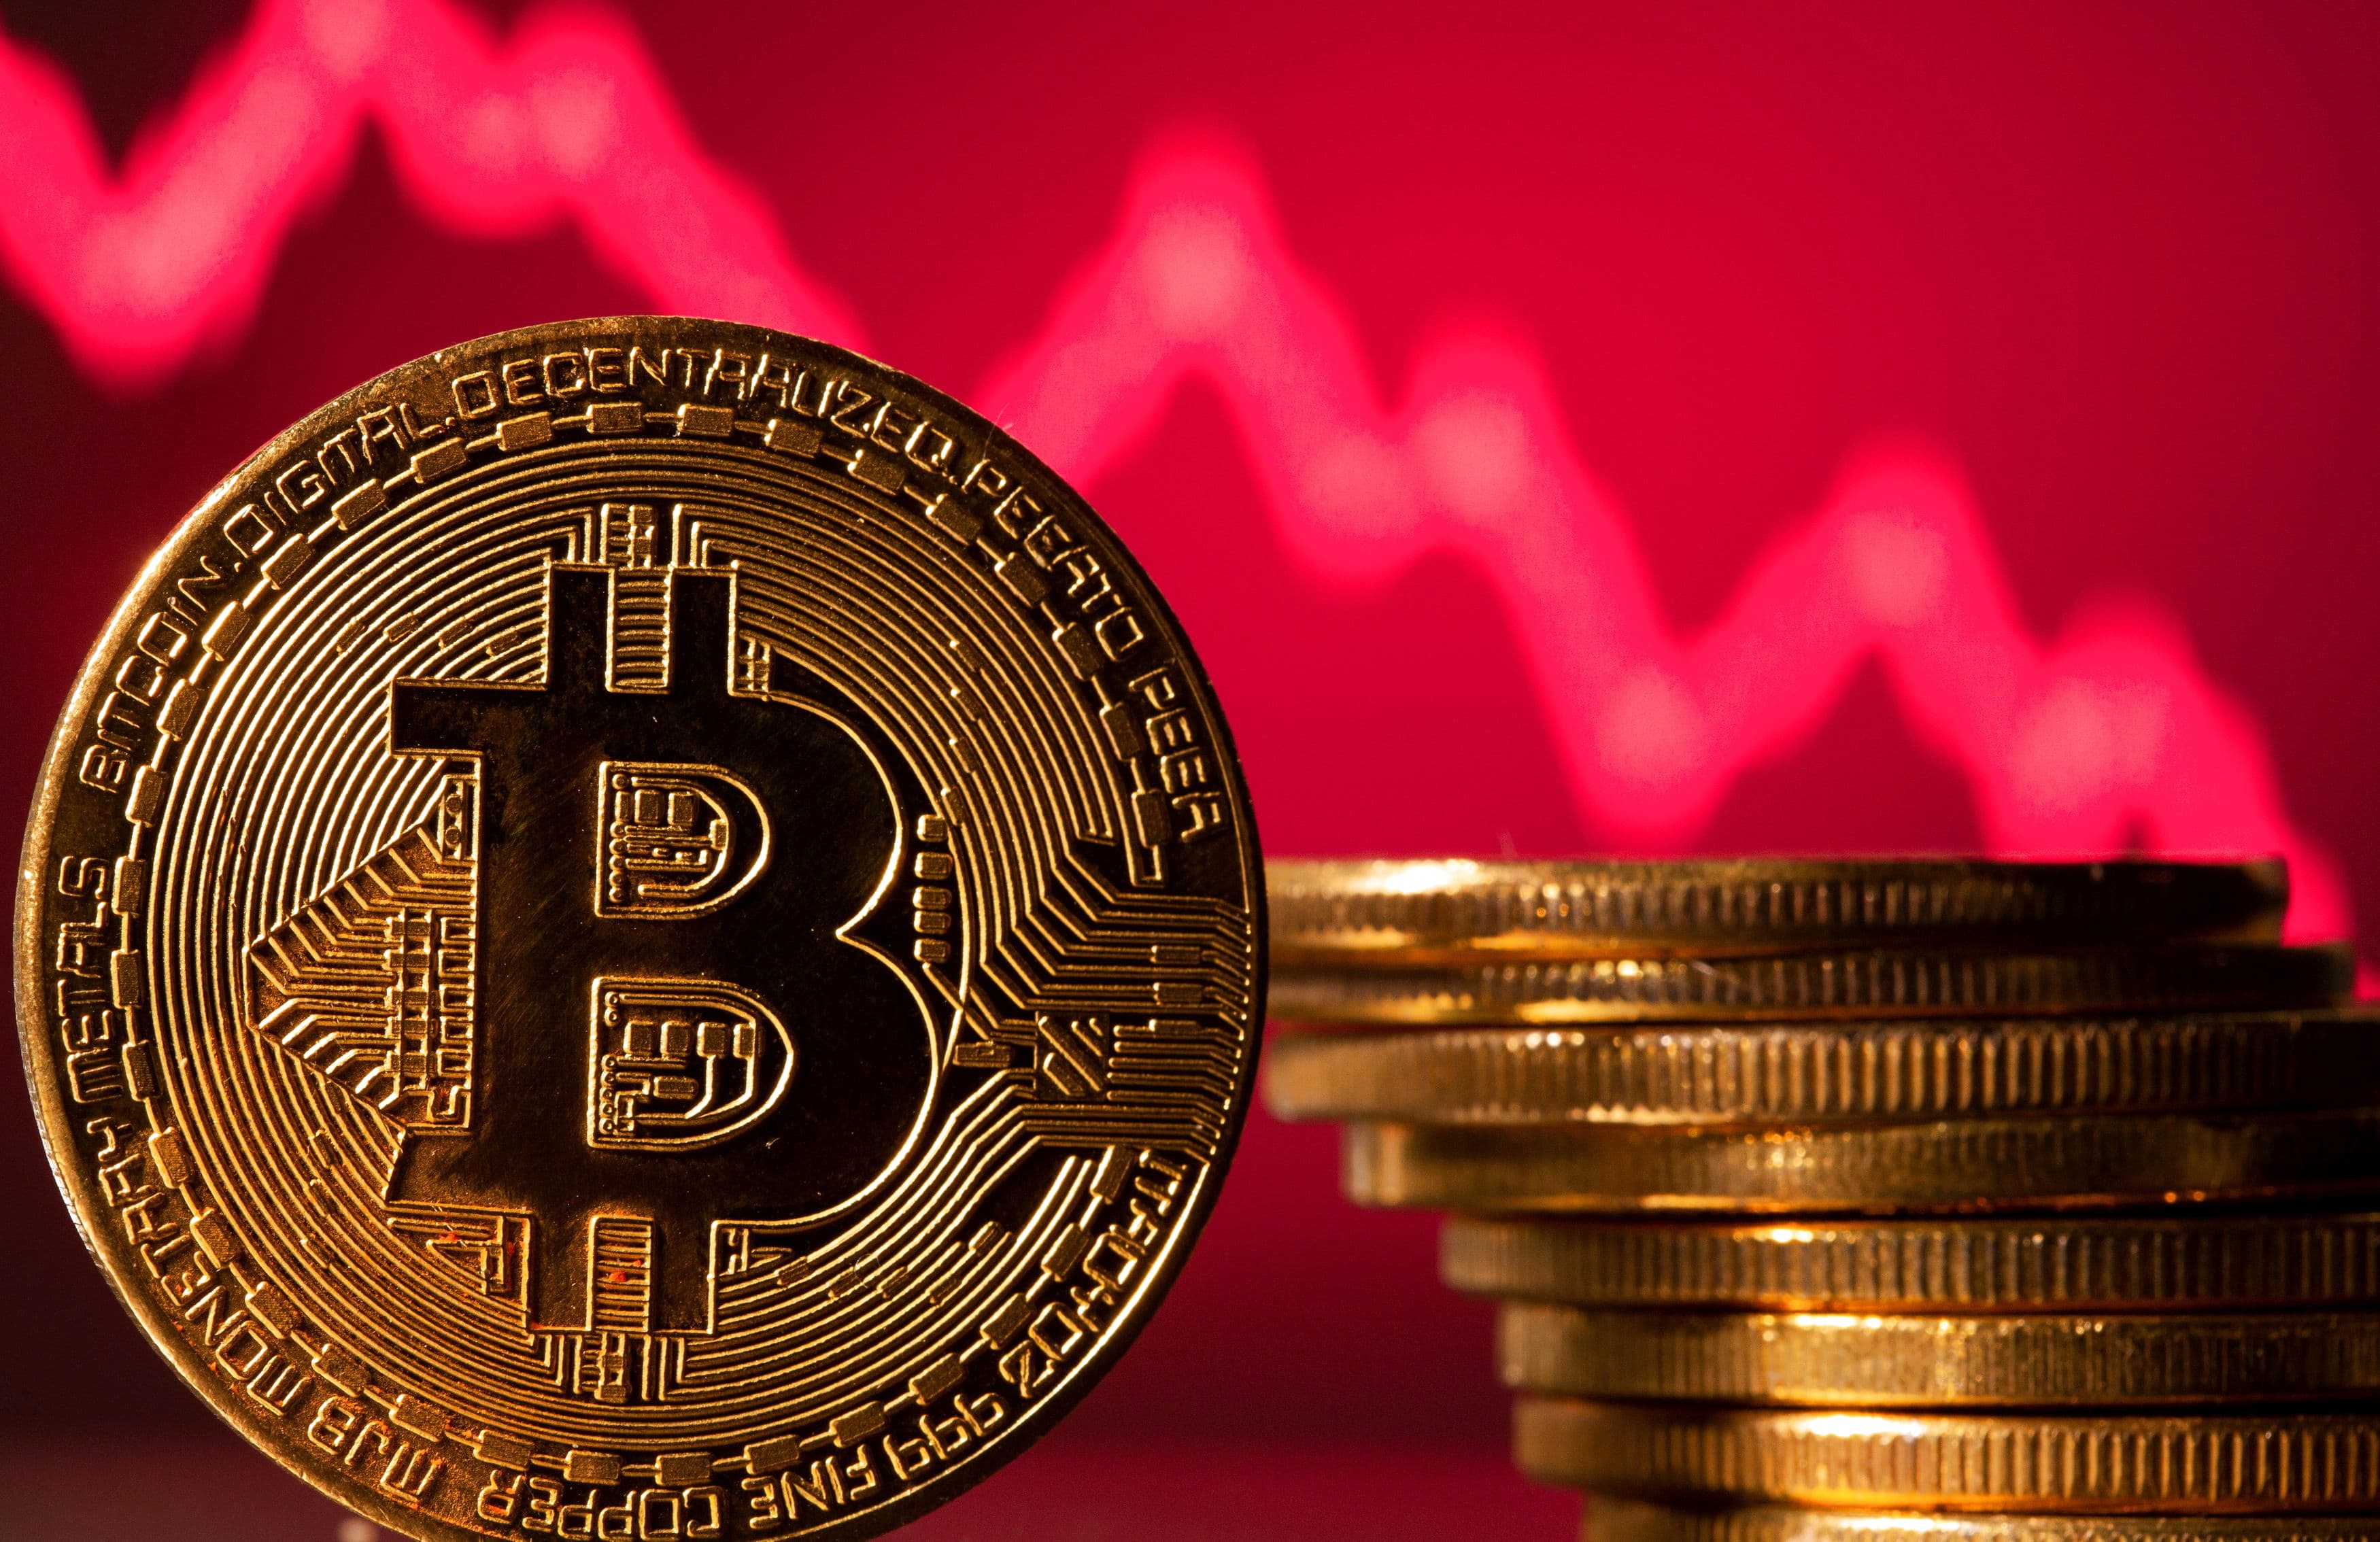 Bitcoin Plummeted To 3-month Low But Then Recovers